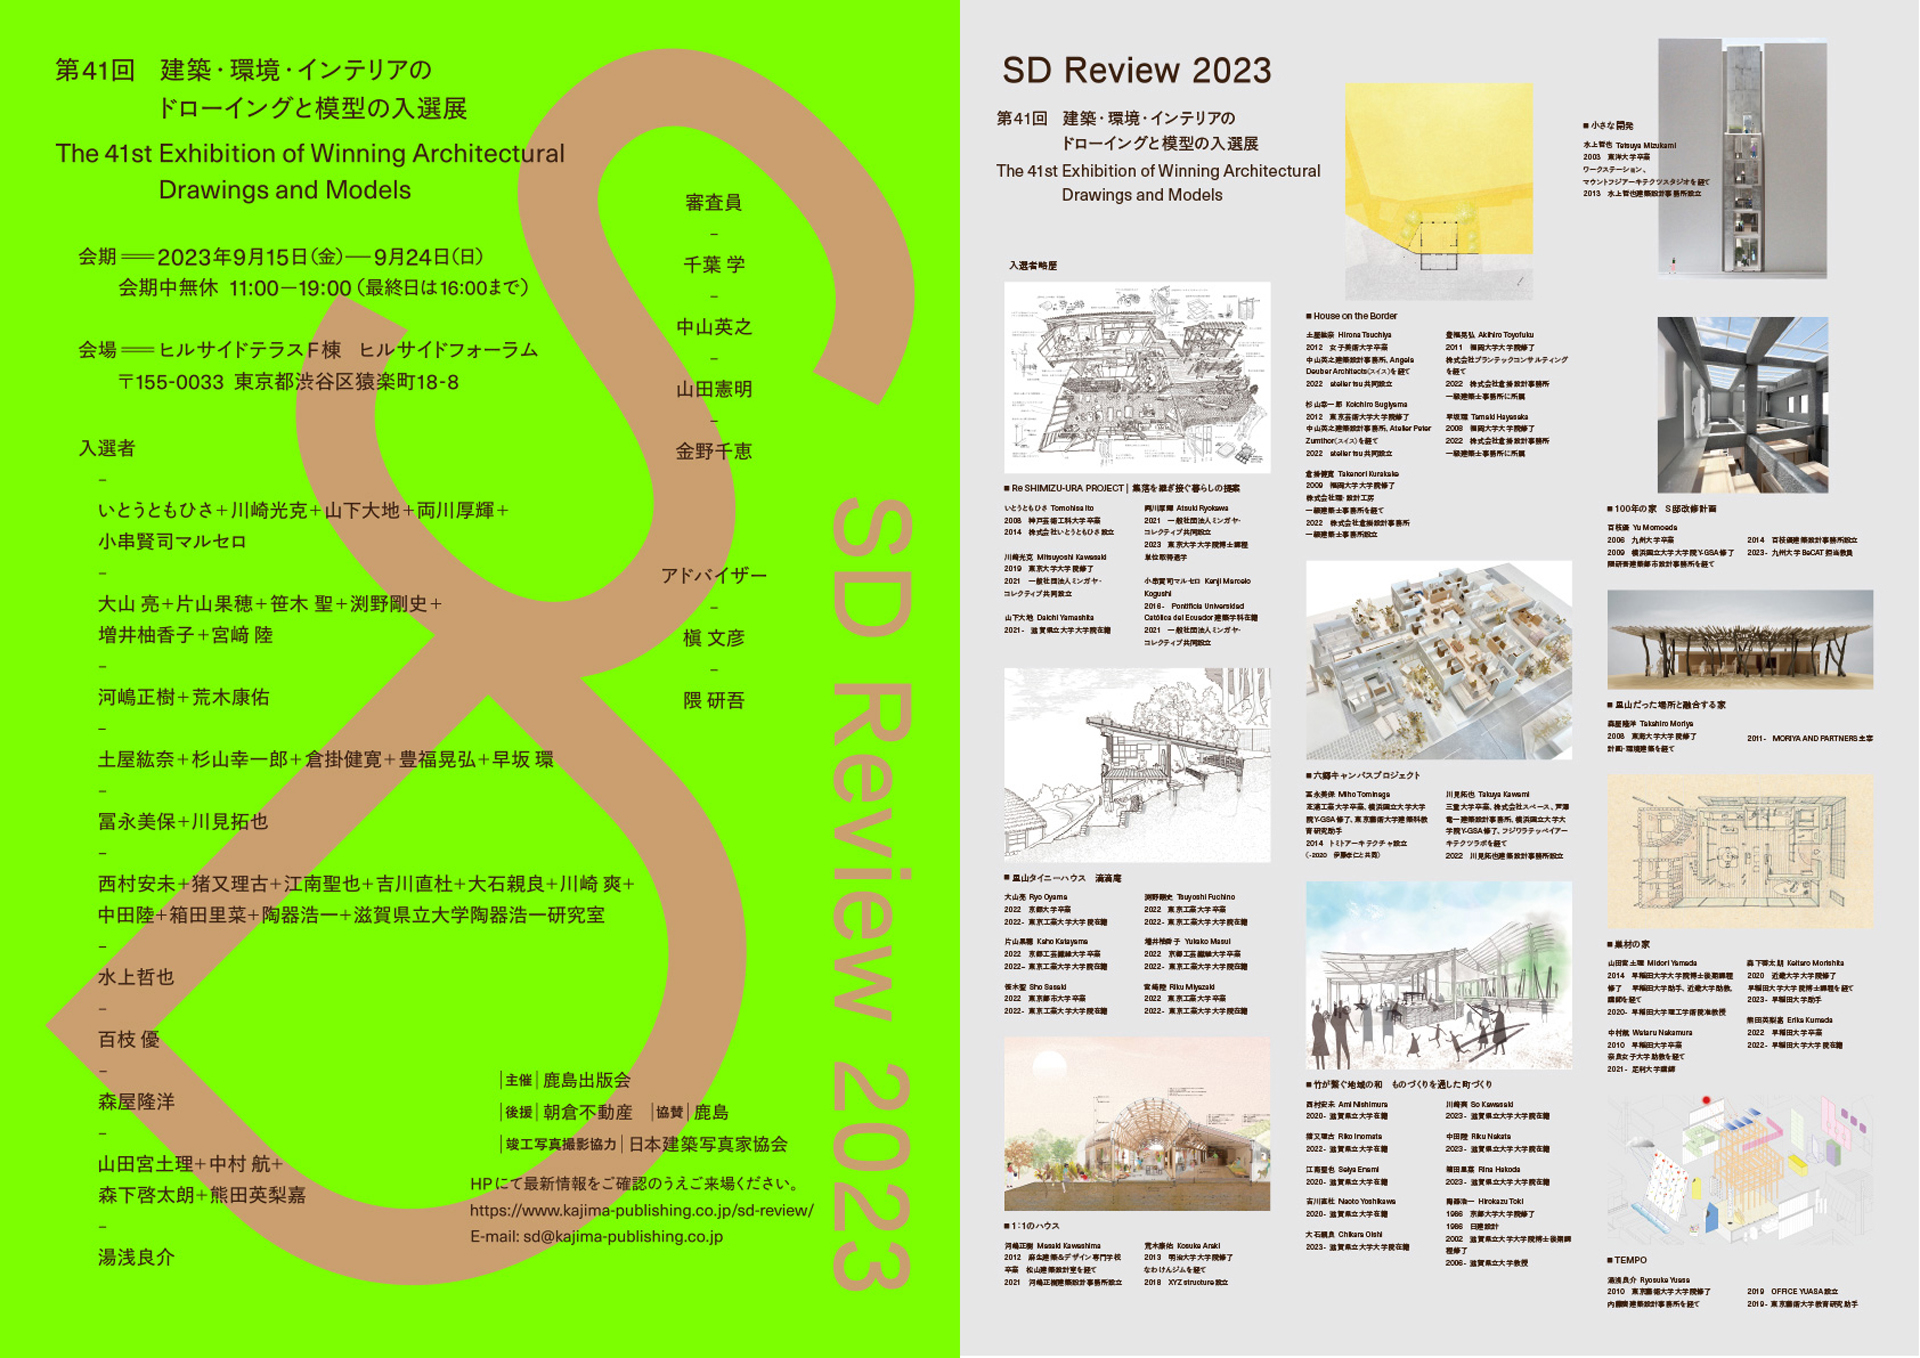 SD Review 2023 Exhibition will open